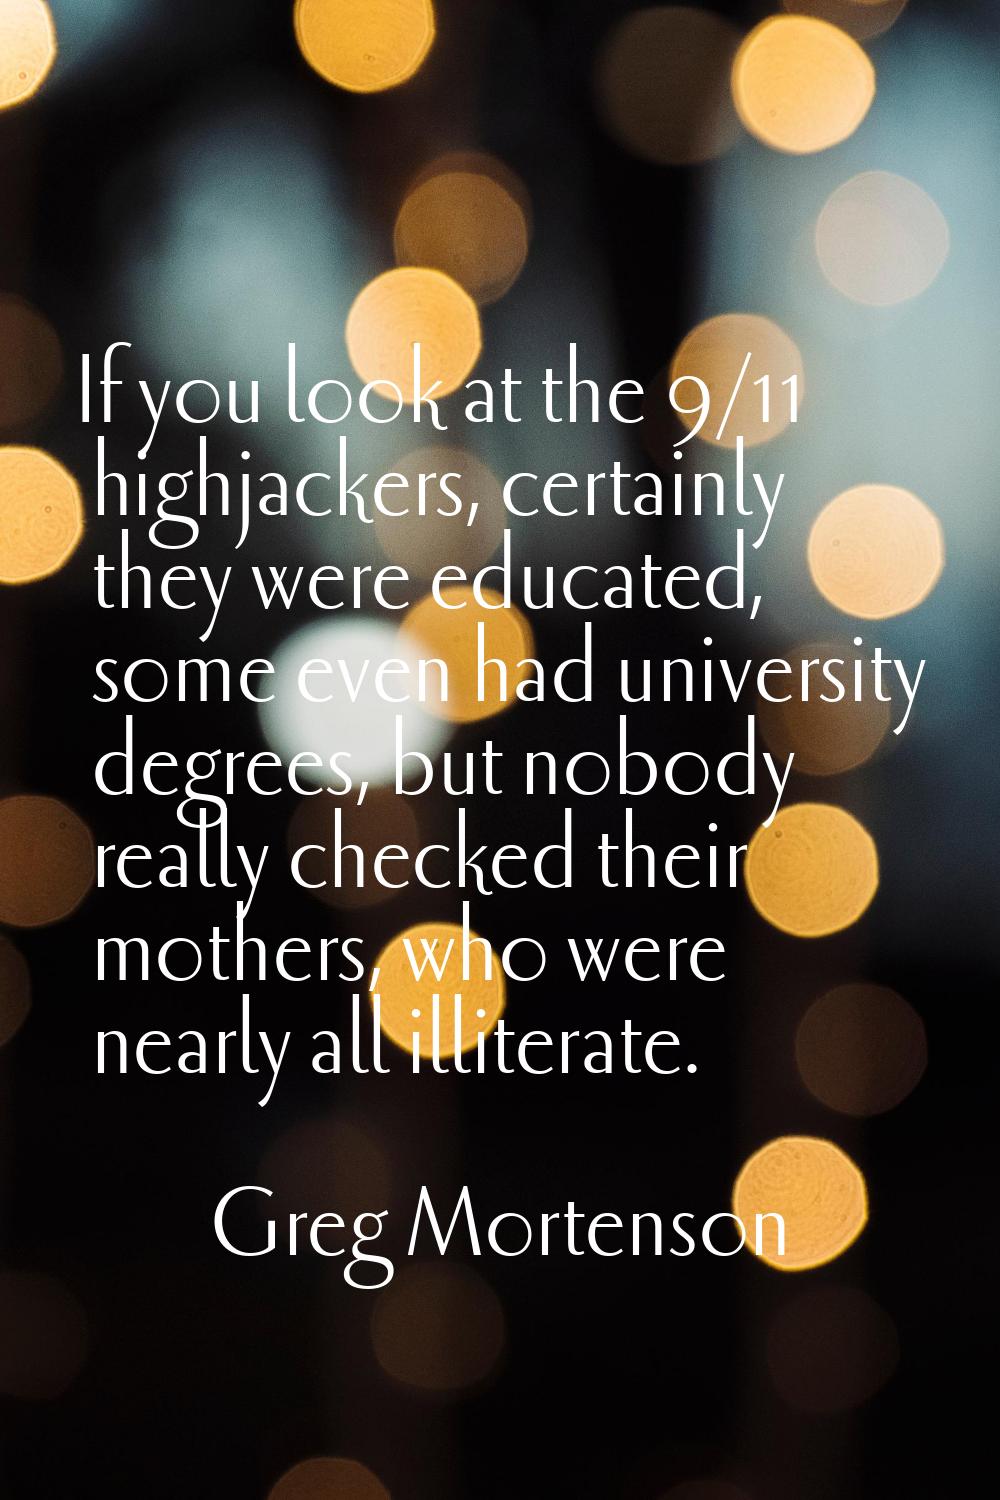 If you look at the 9/11 highjackers, certainly they were educated, some even had university degrees